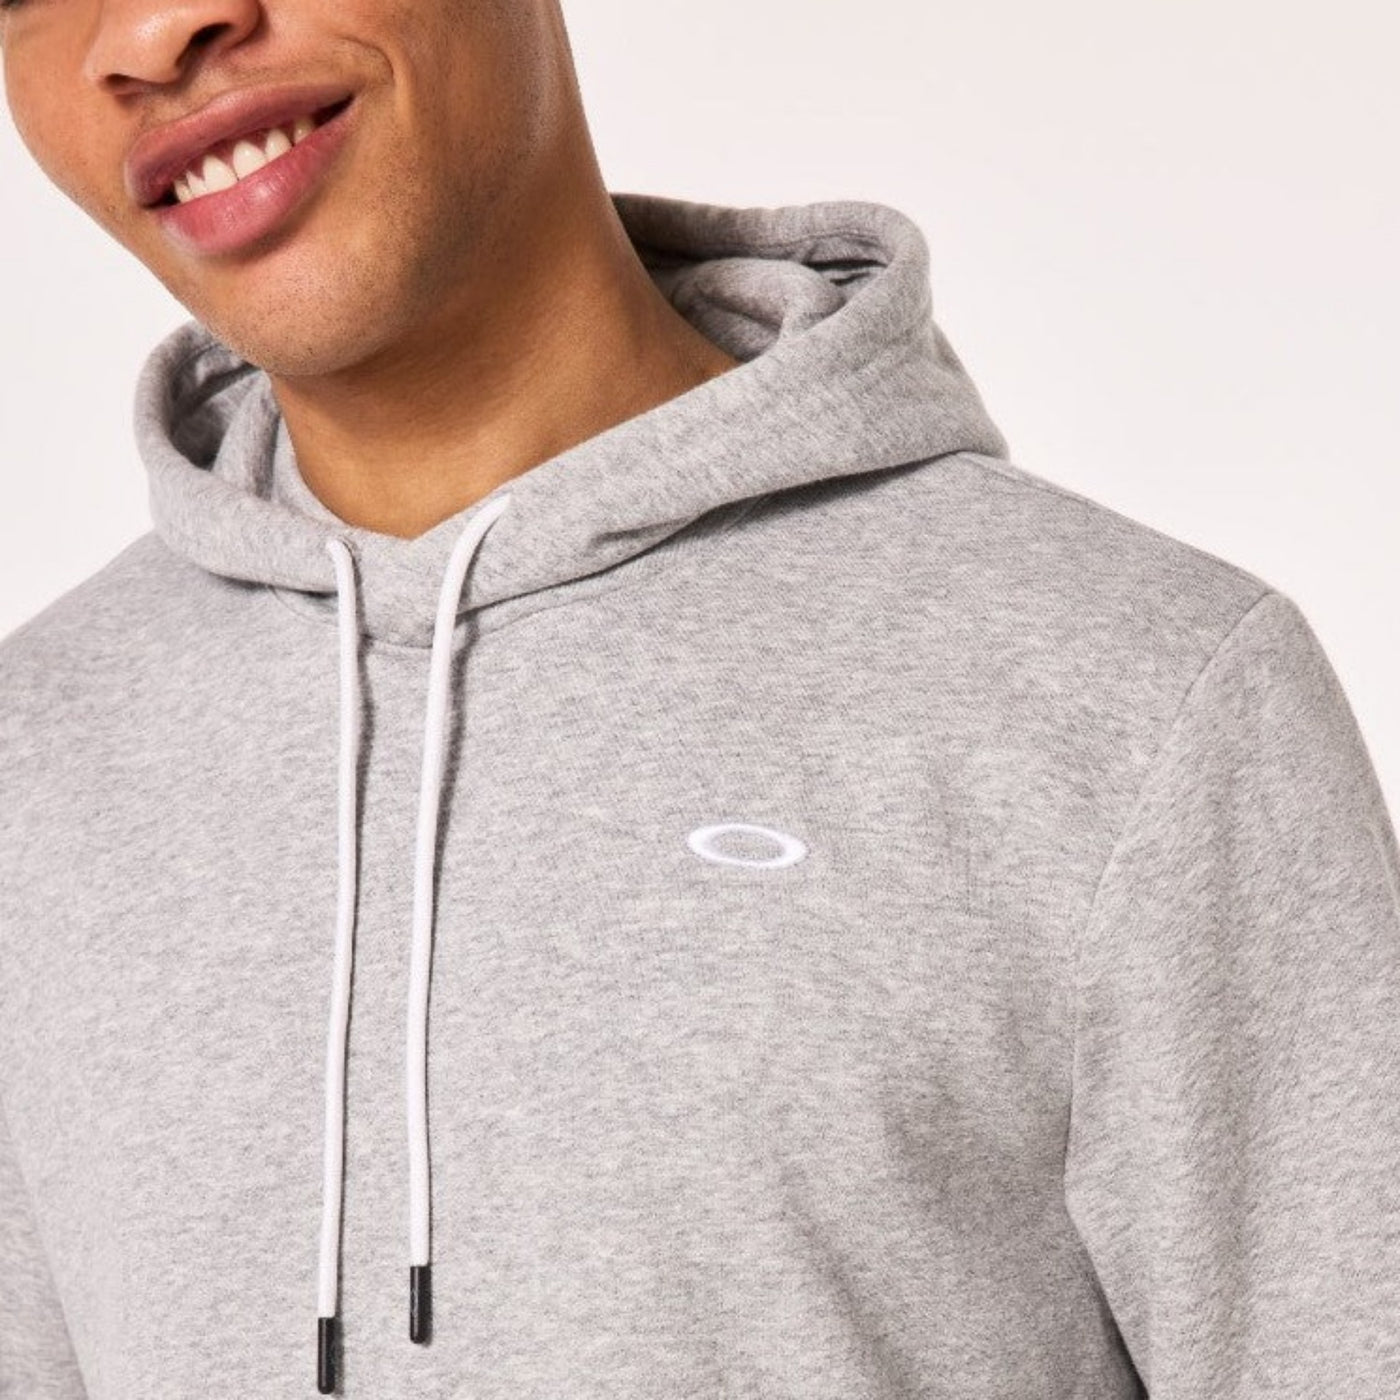 Oakley Relax Pullover Hoodie 2.0 - New Granite Heather